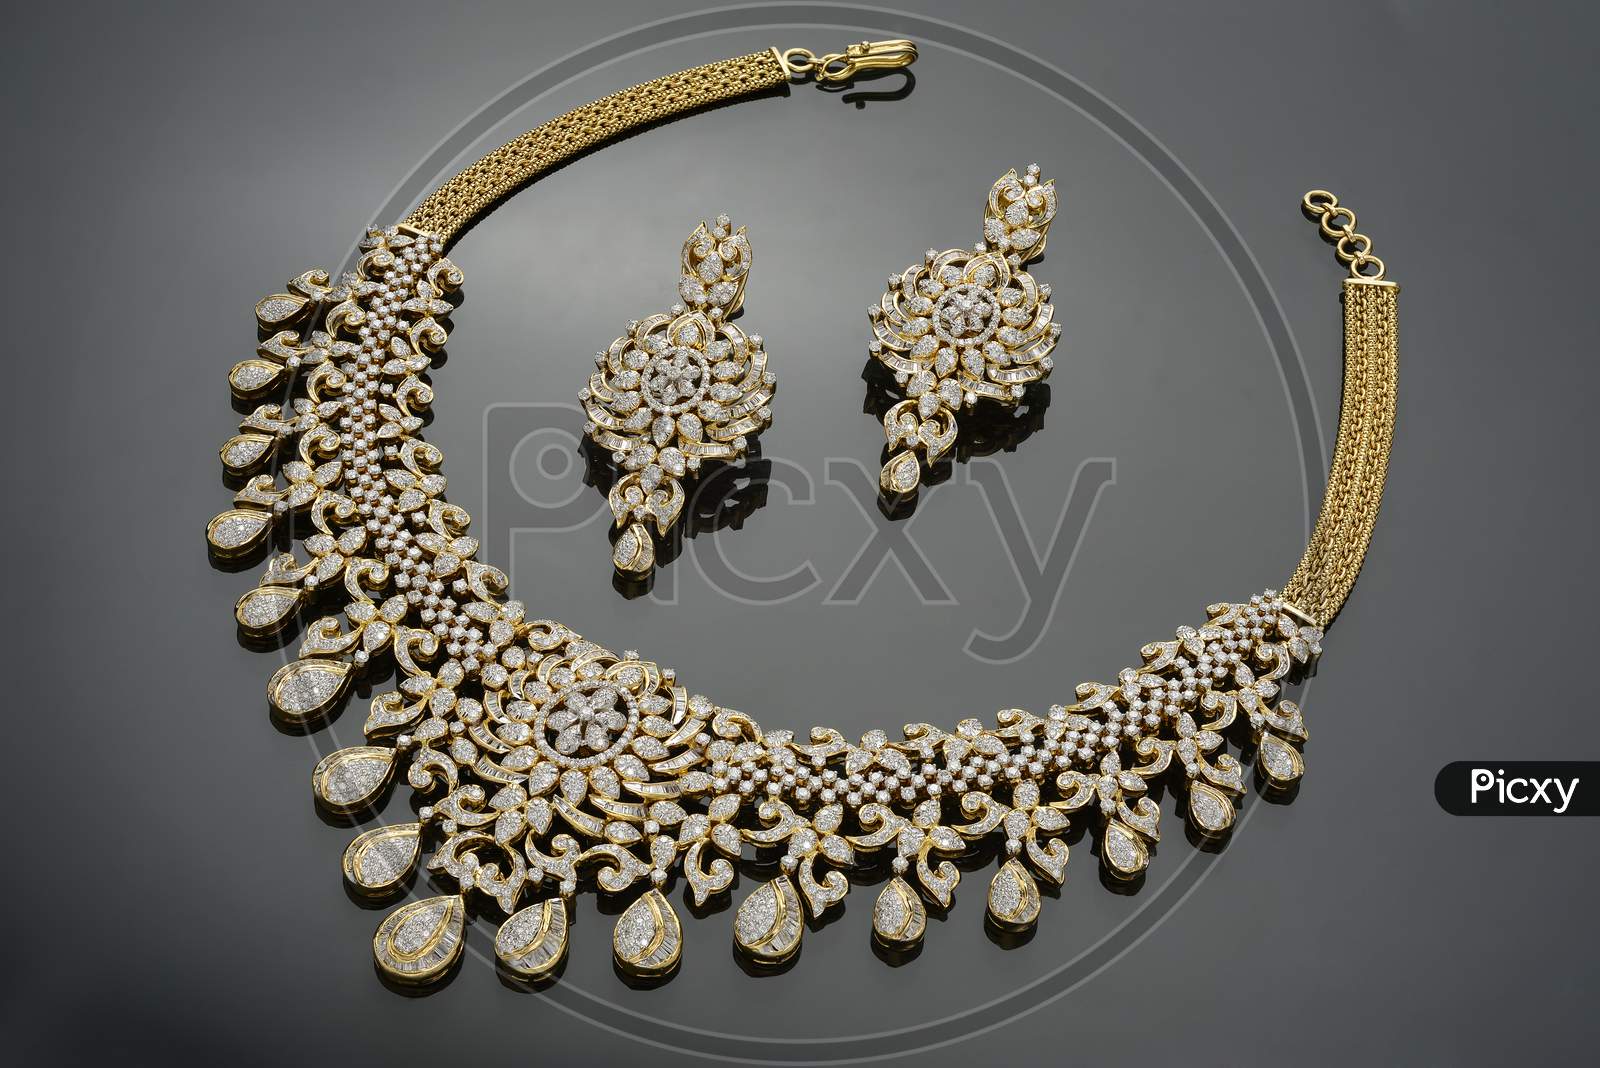 A Diamond Necklace with earrings set